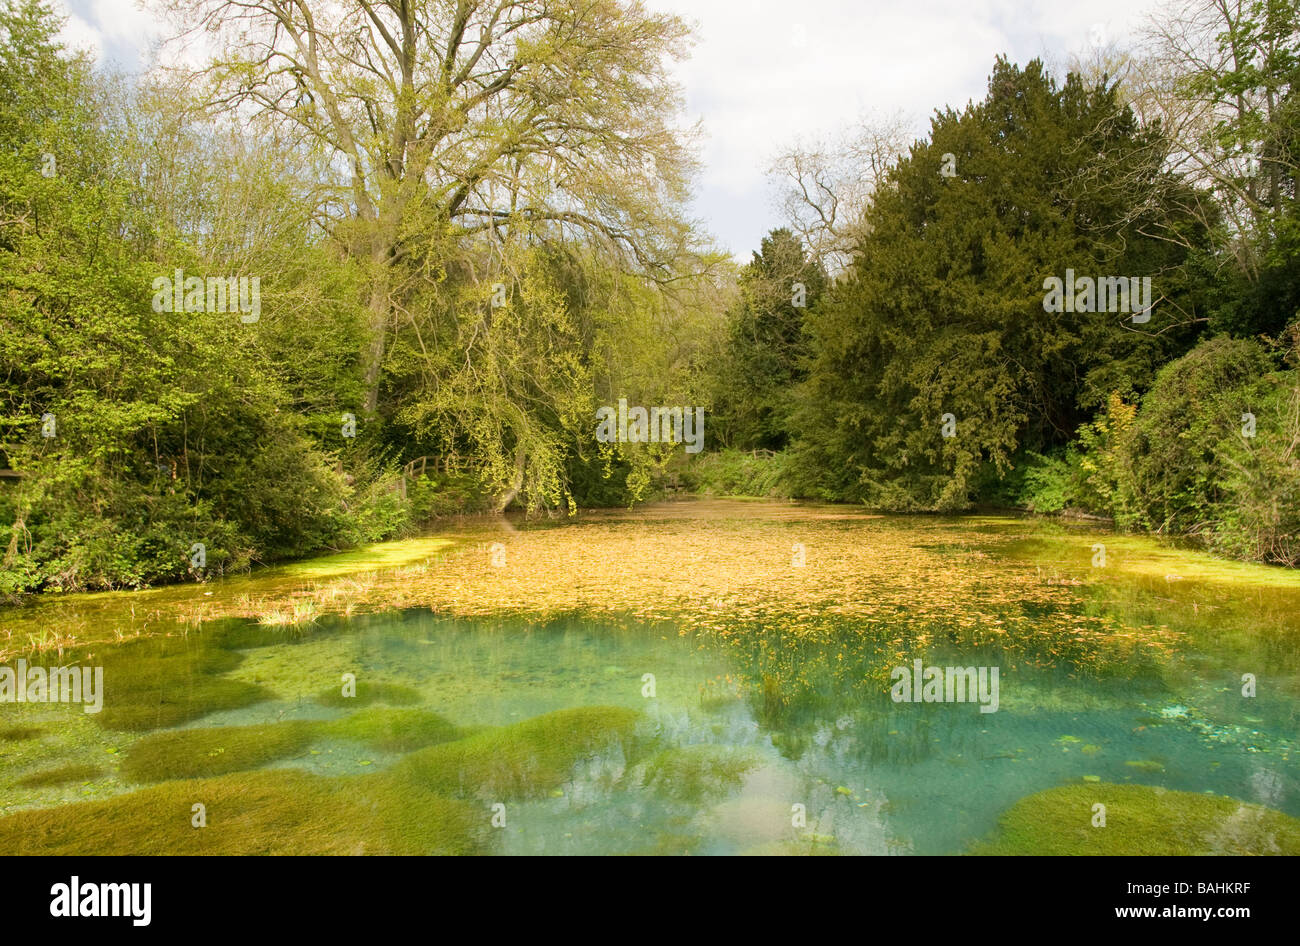 The Silent Pool in Surrey, England. Stock Photo